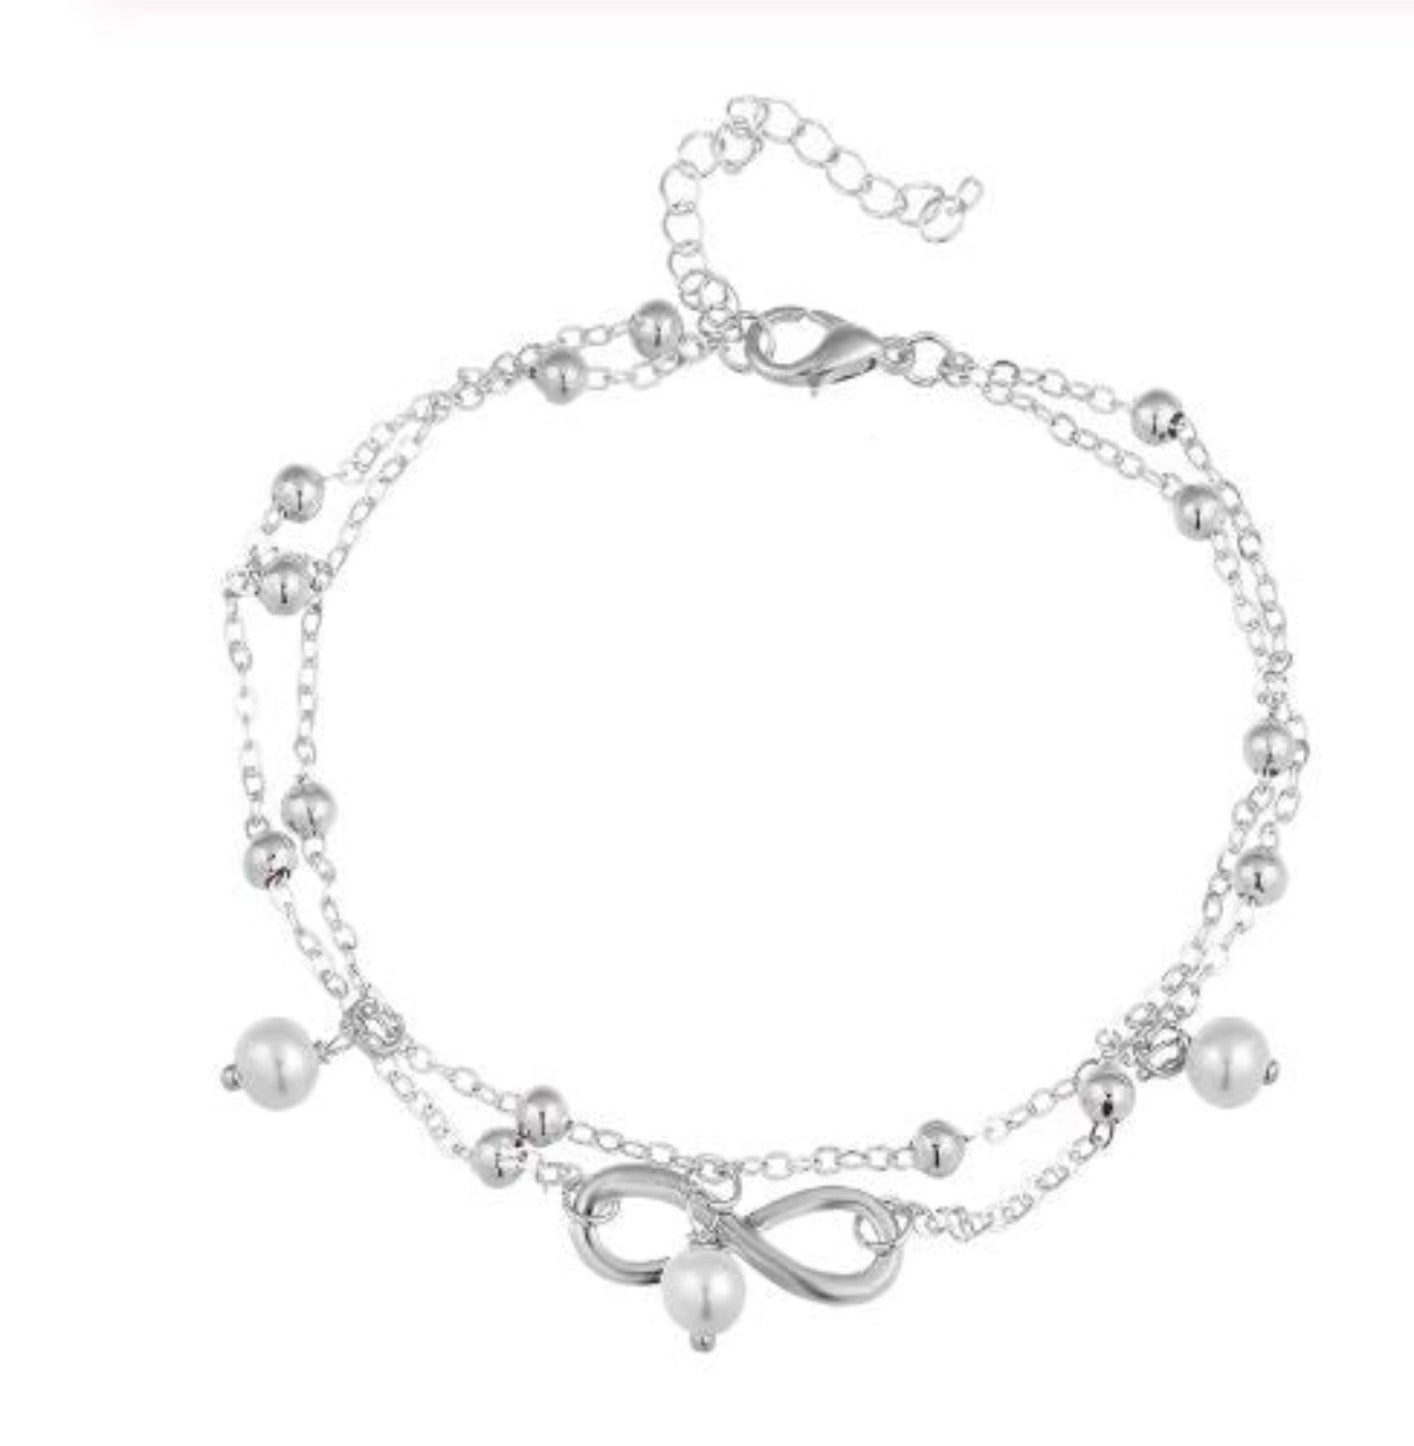 EMBER BRACELET ering Yubama Jewelry Online Store - The Elegant Designs of Gold and Silver ! Silver 